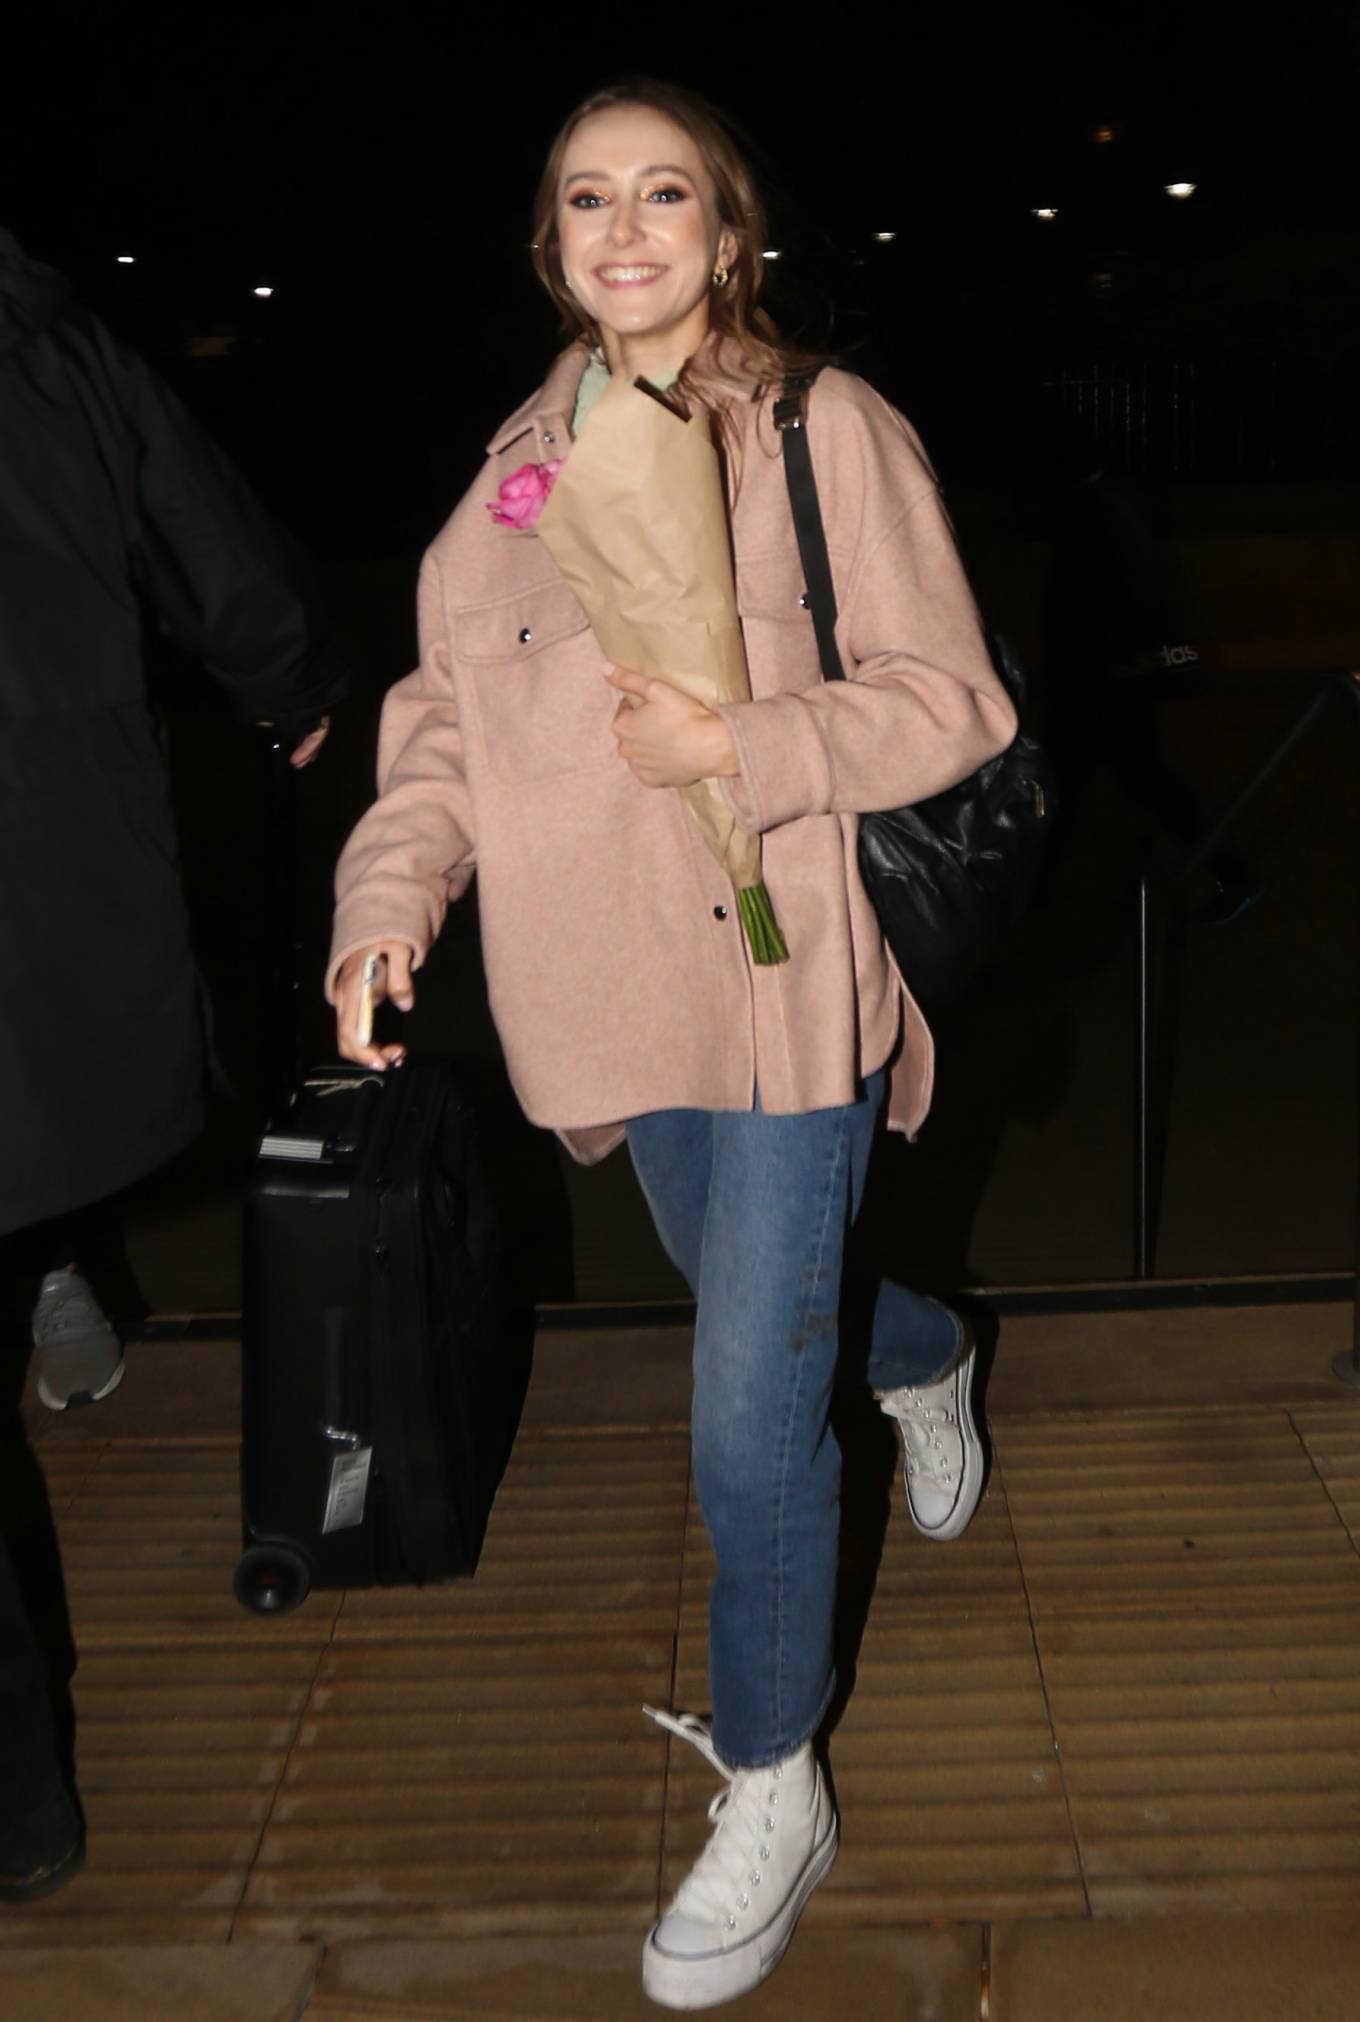 Rose Ayling-Ellis 2022 : Rose Ayling-Ellis – The cast of this years Strictly Come Dancing tour arrive in Sheffield-02